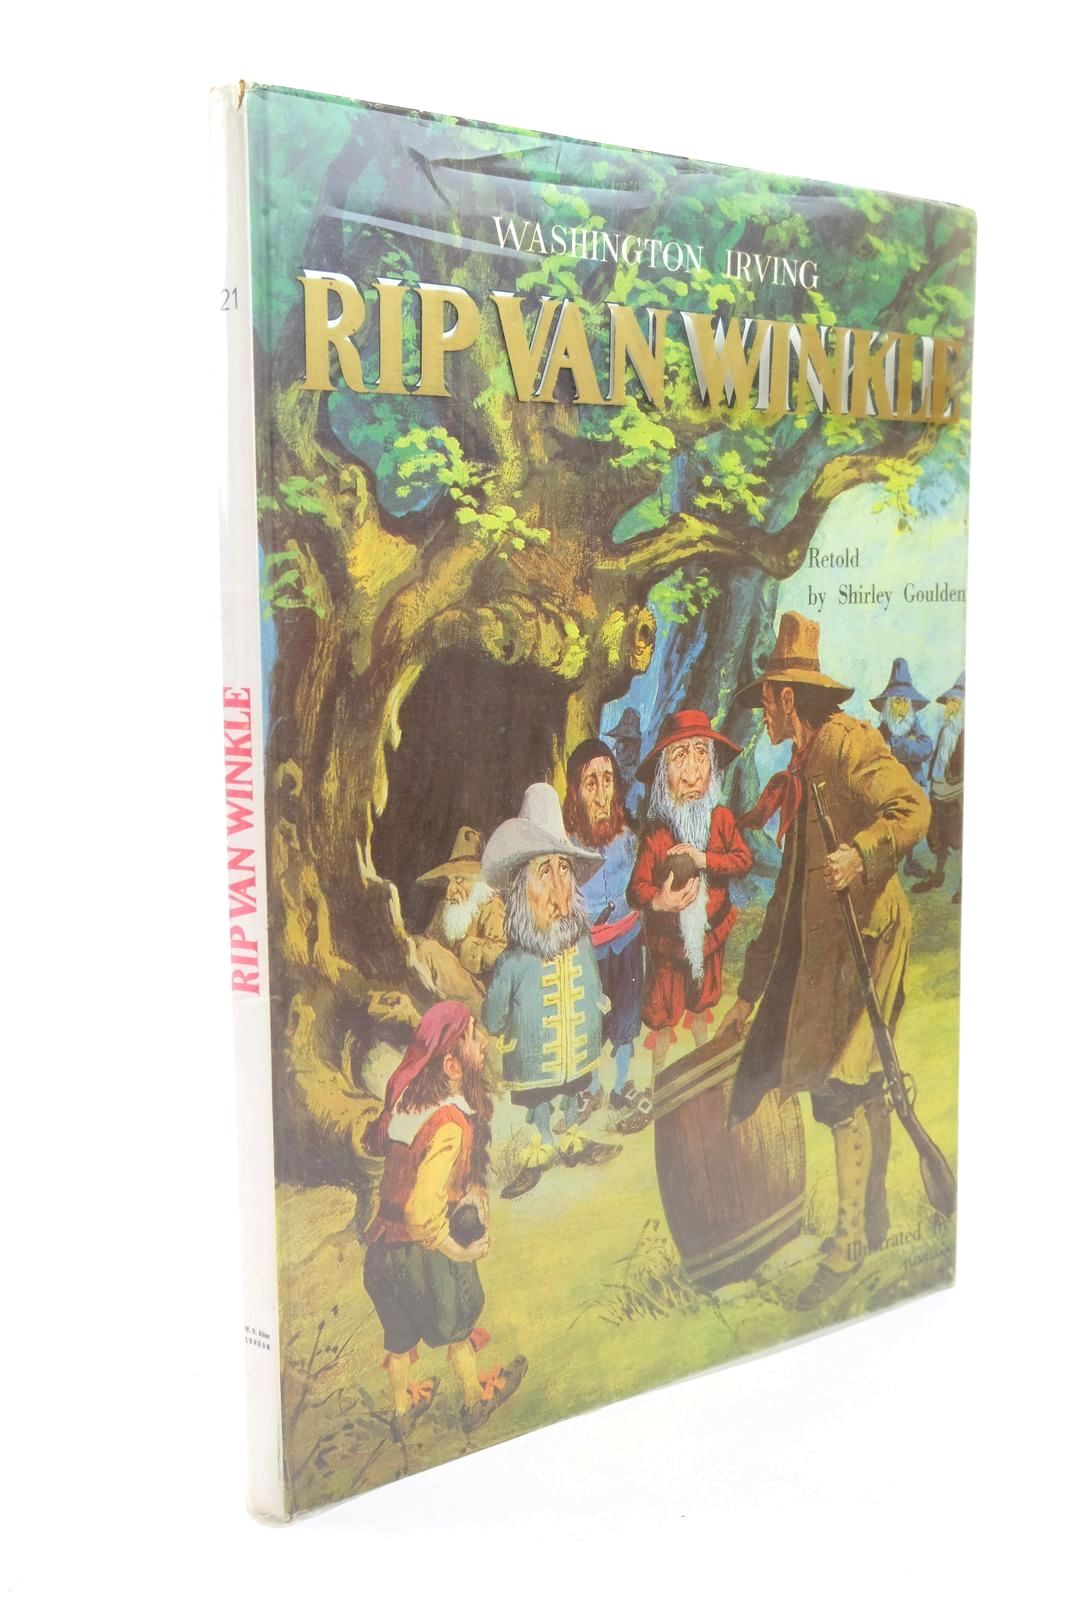 Photo of RIP VAN WINKLE written by Irving, Washington Goulden, Shirley illustrated by Nardini,  published by W. H. Allen (STOCK CODE: 1323019)  for sale by Stella & Rose's Books